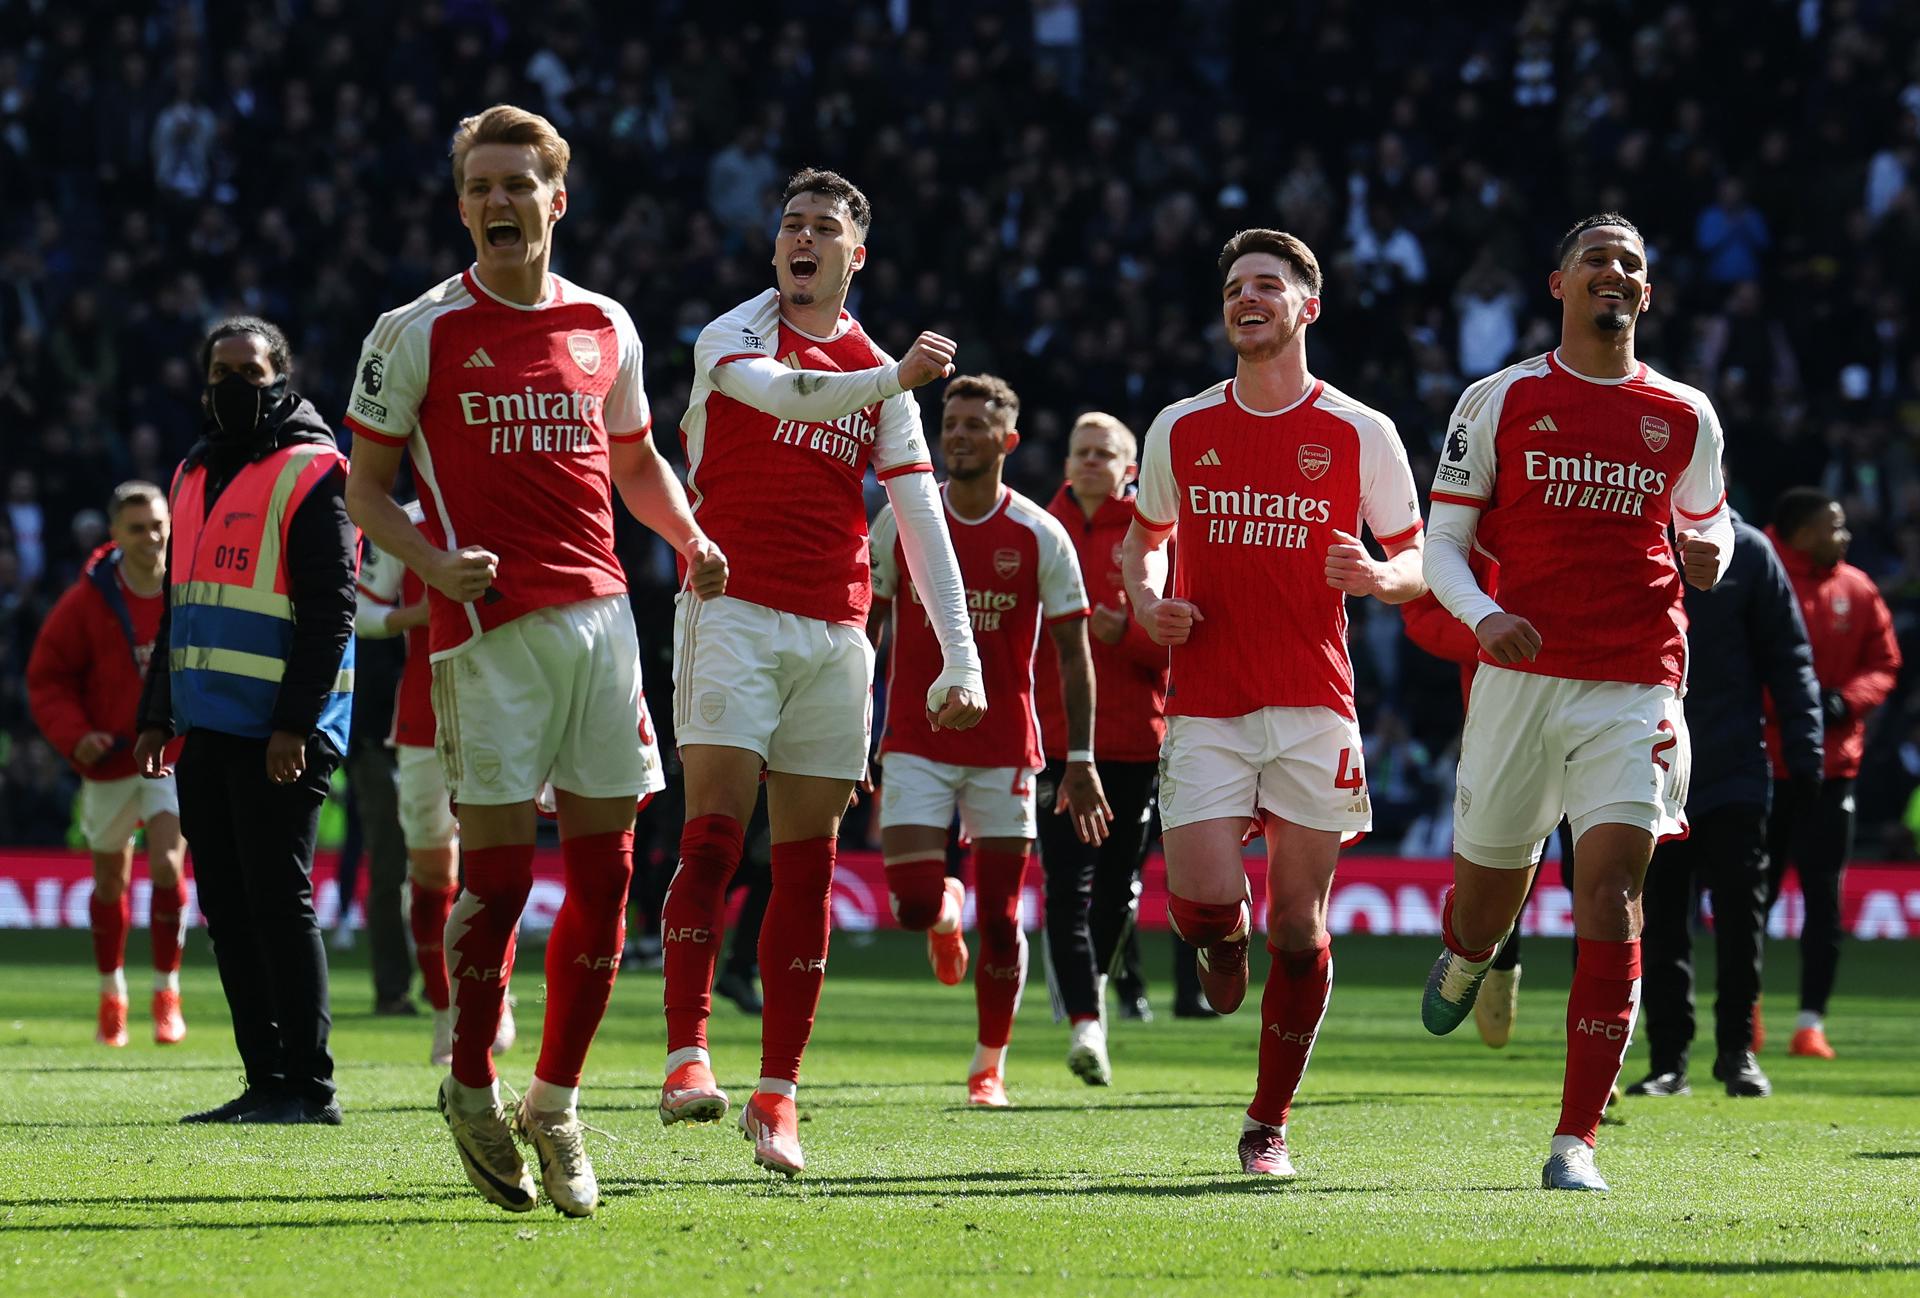 arsenal-clings-to-the-lead-of-the-premier-league-but-manchester-city-is-still-on-the-prowl